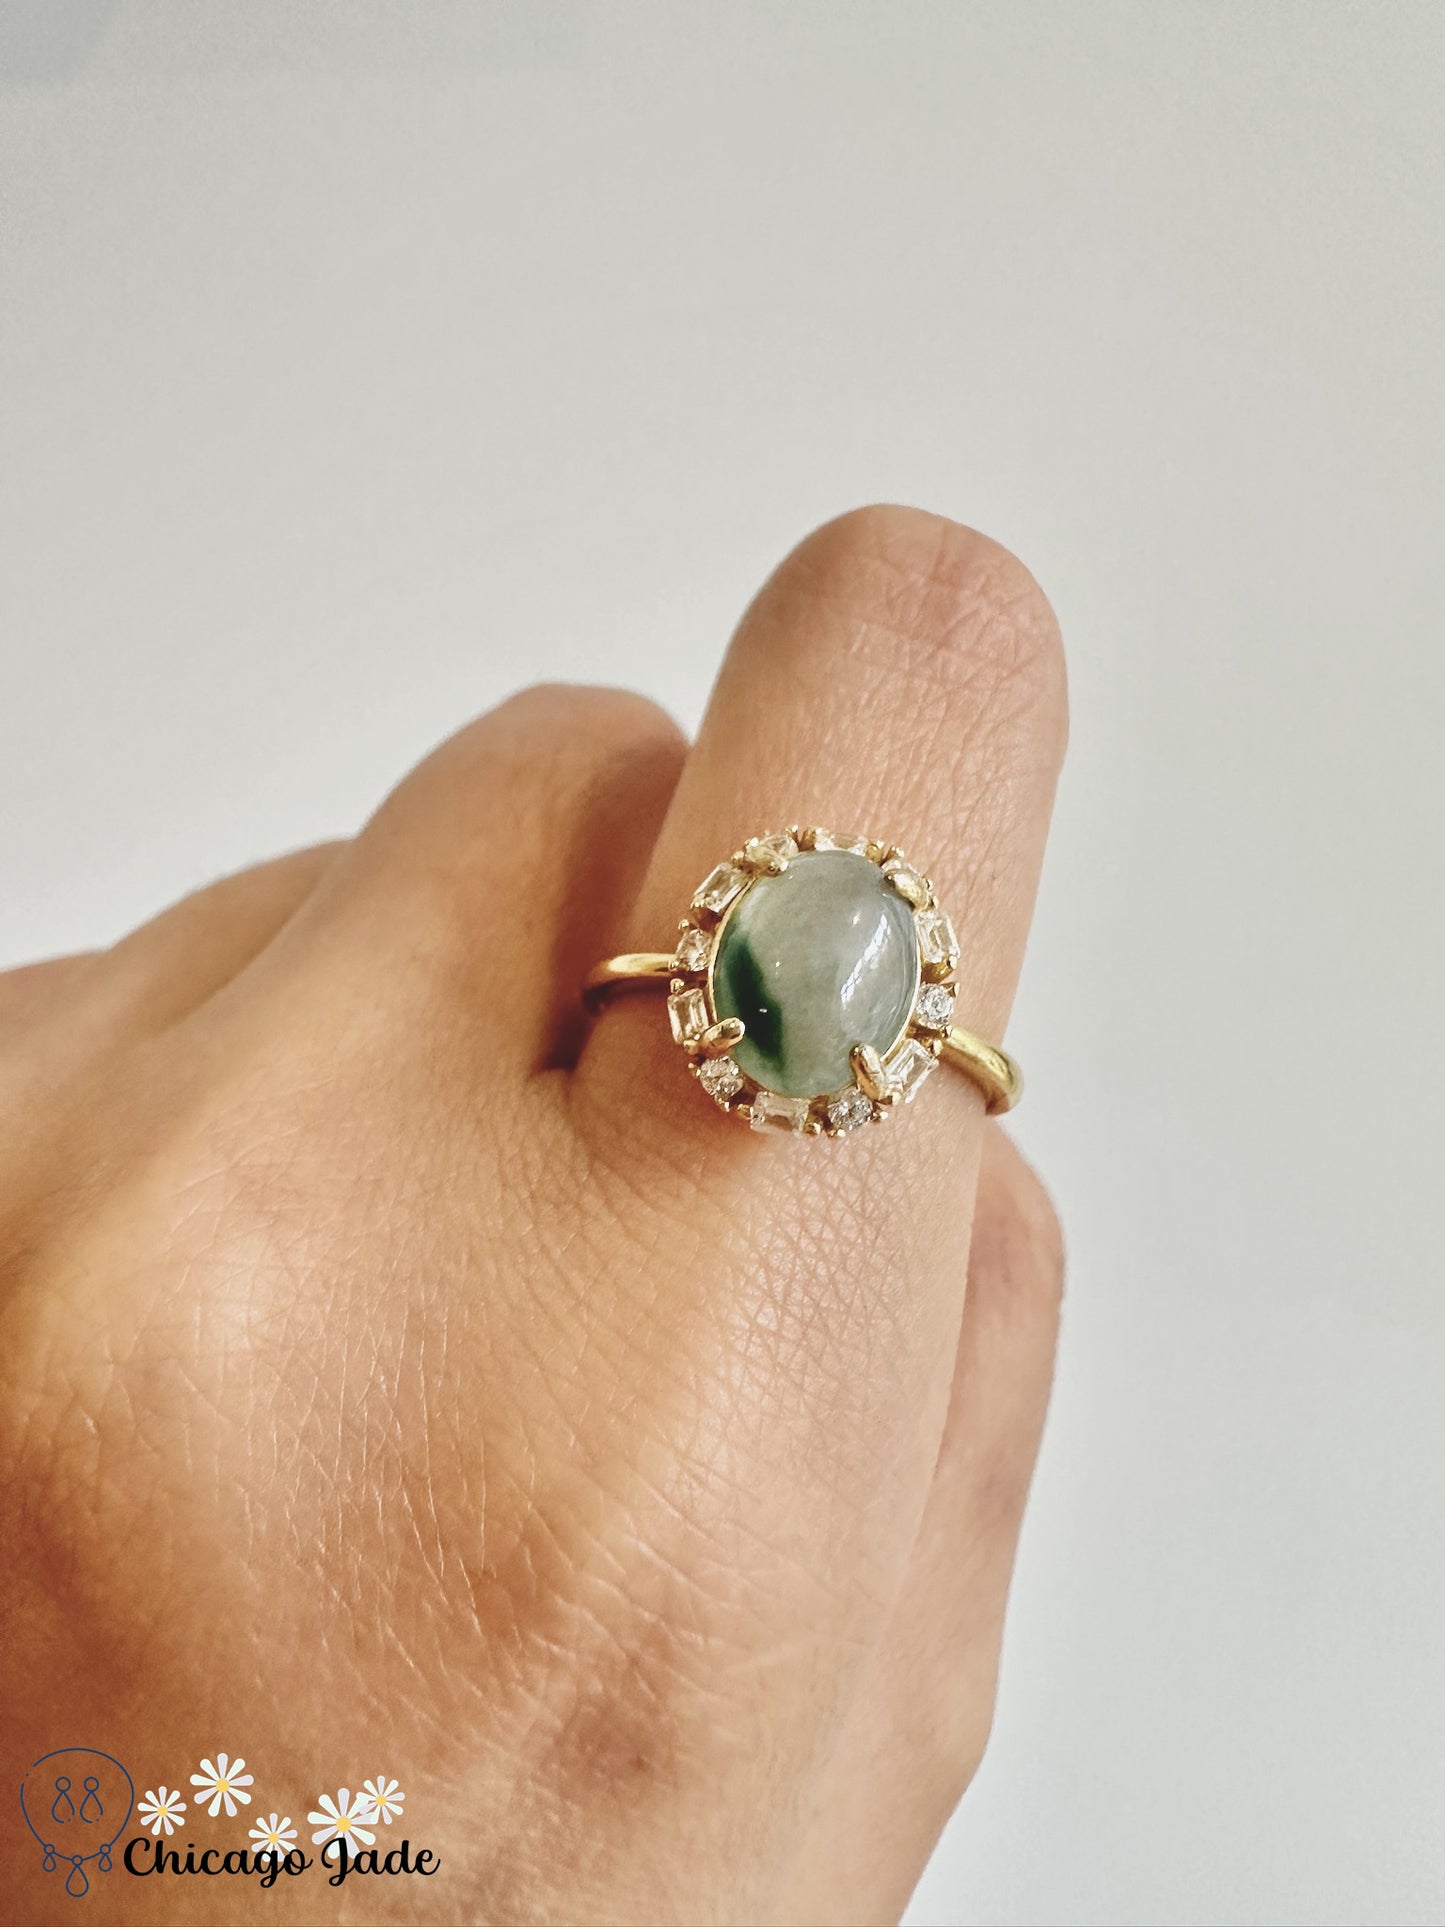 Oval Floral Green on translucent white jadeite sterling silver ring